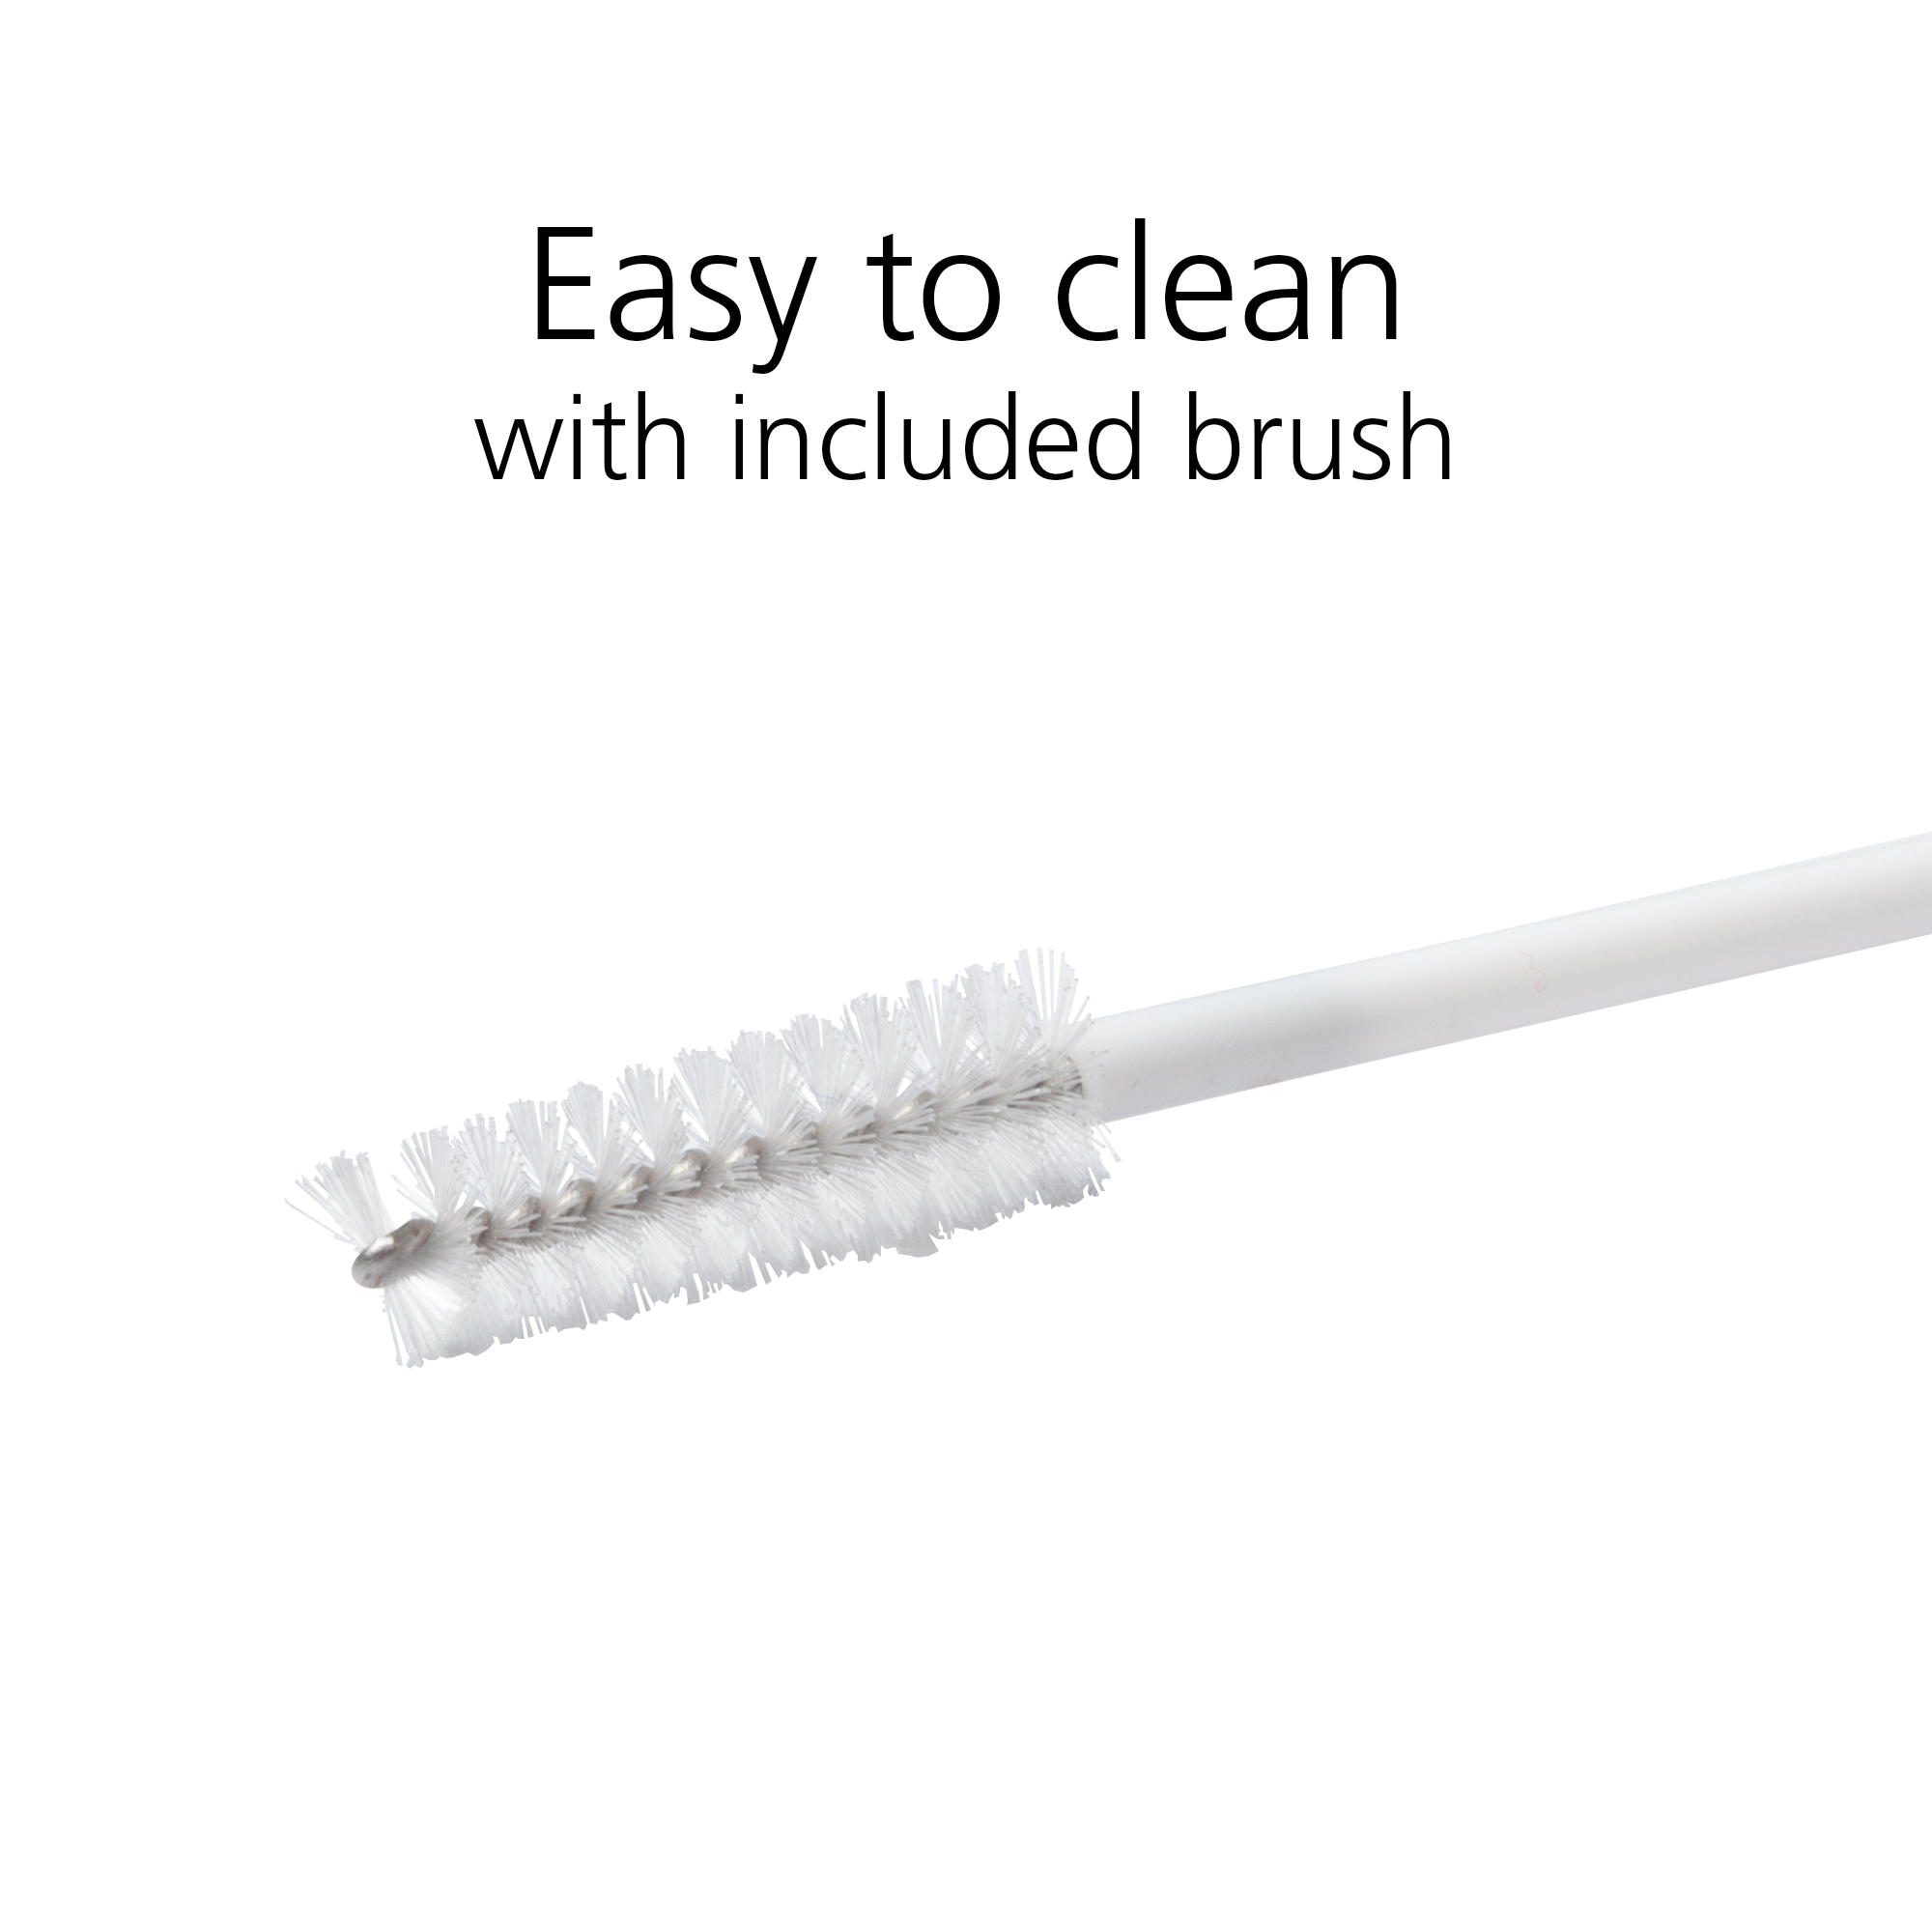 Easy to clean with included brush